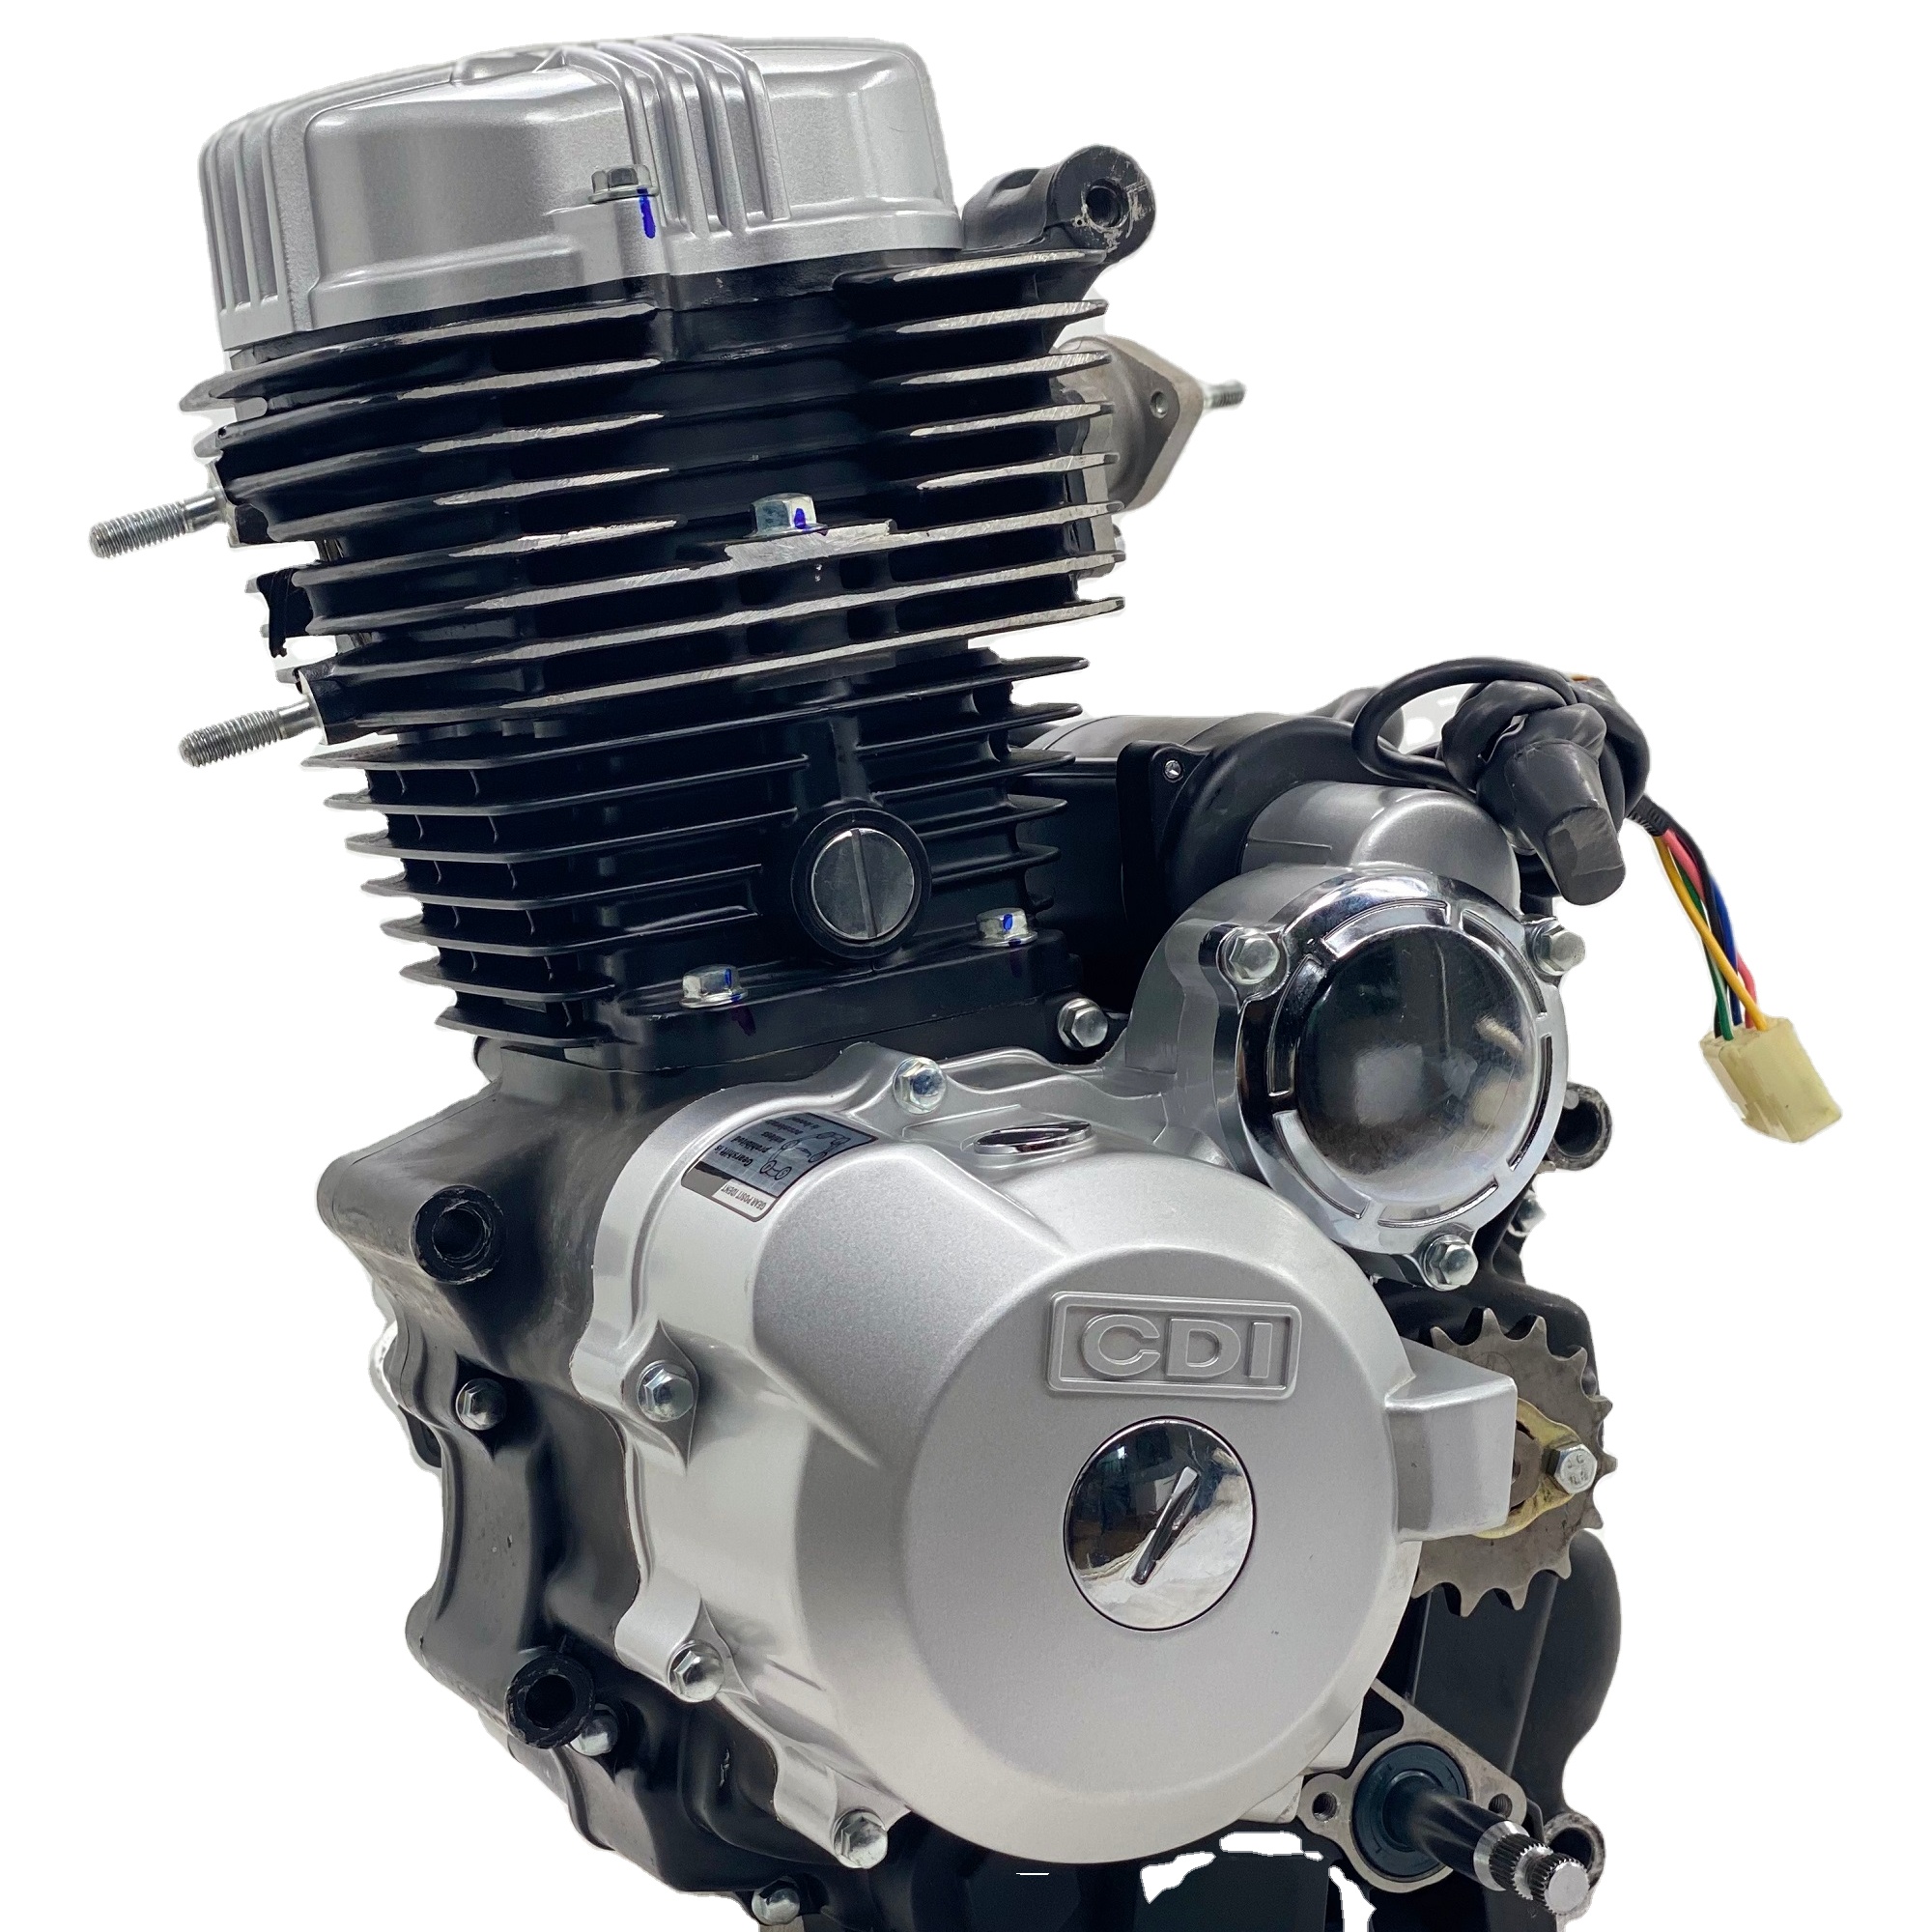 China DAYANG High Performance AIr-cooled 150cc Parts Tricycle Engine single cylinder style method origin ignition CDI